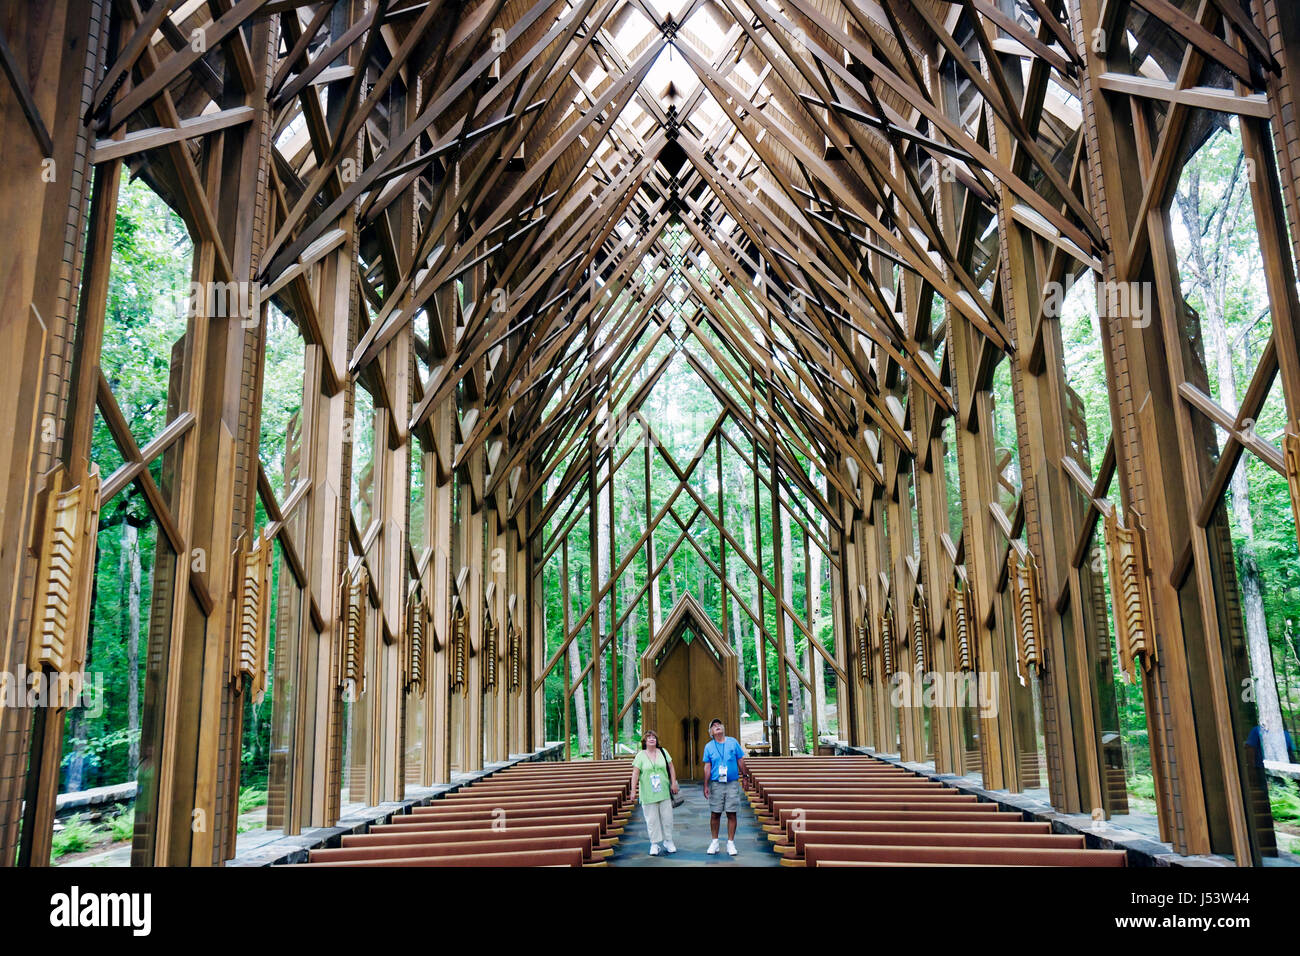 Arkansas Hot Springs,Garvan Woodland Gardens,Anthony Cathedral,chapel,religion,wood,glass,structure,designer Jennings & McKee firm,soaring ceiling,57 Stock Photo